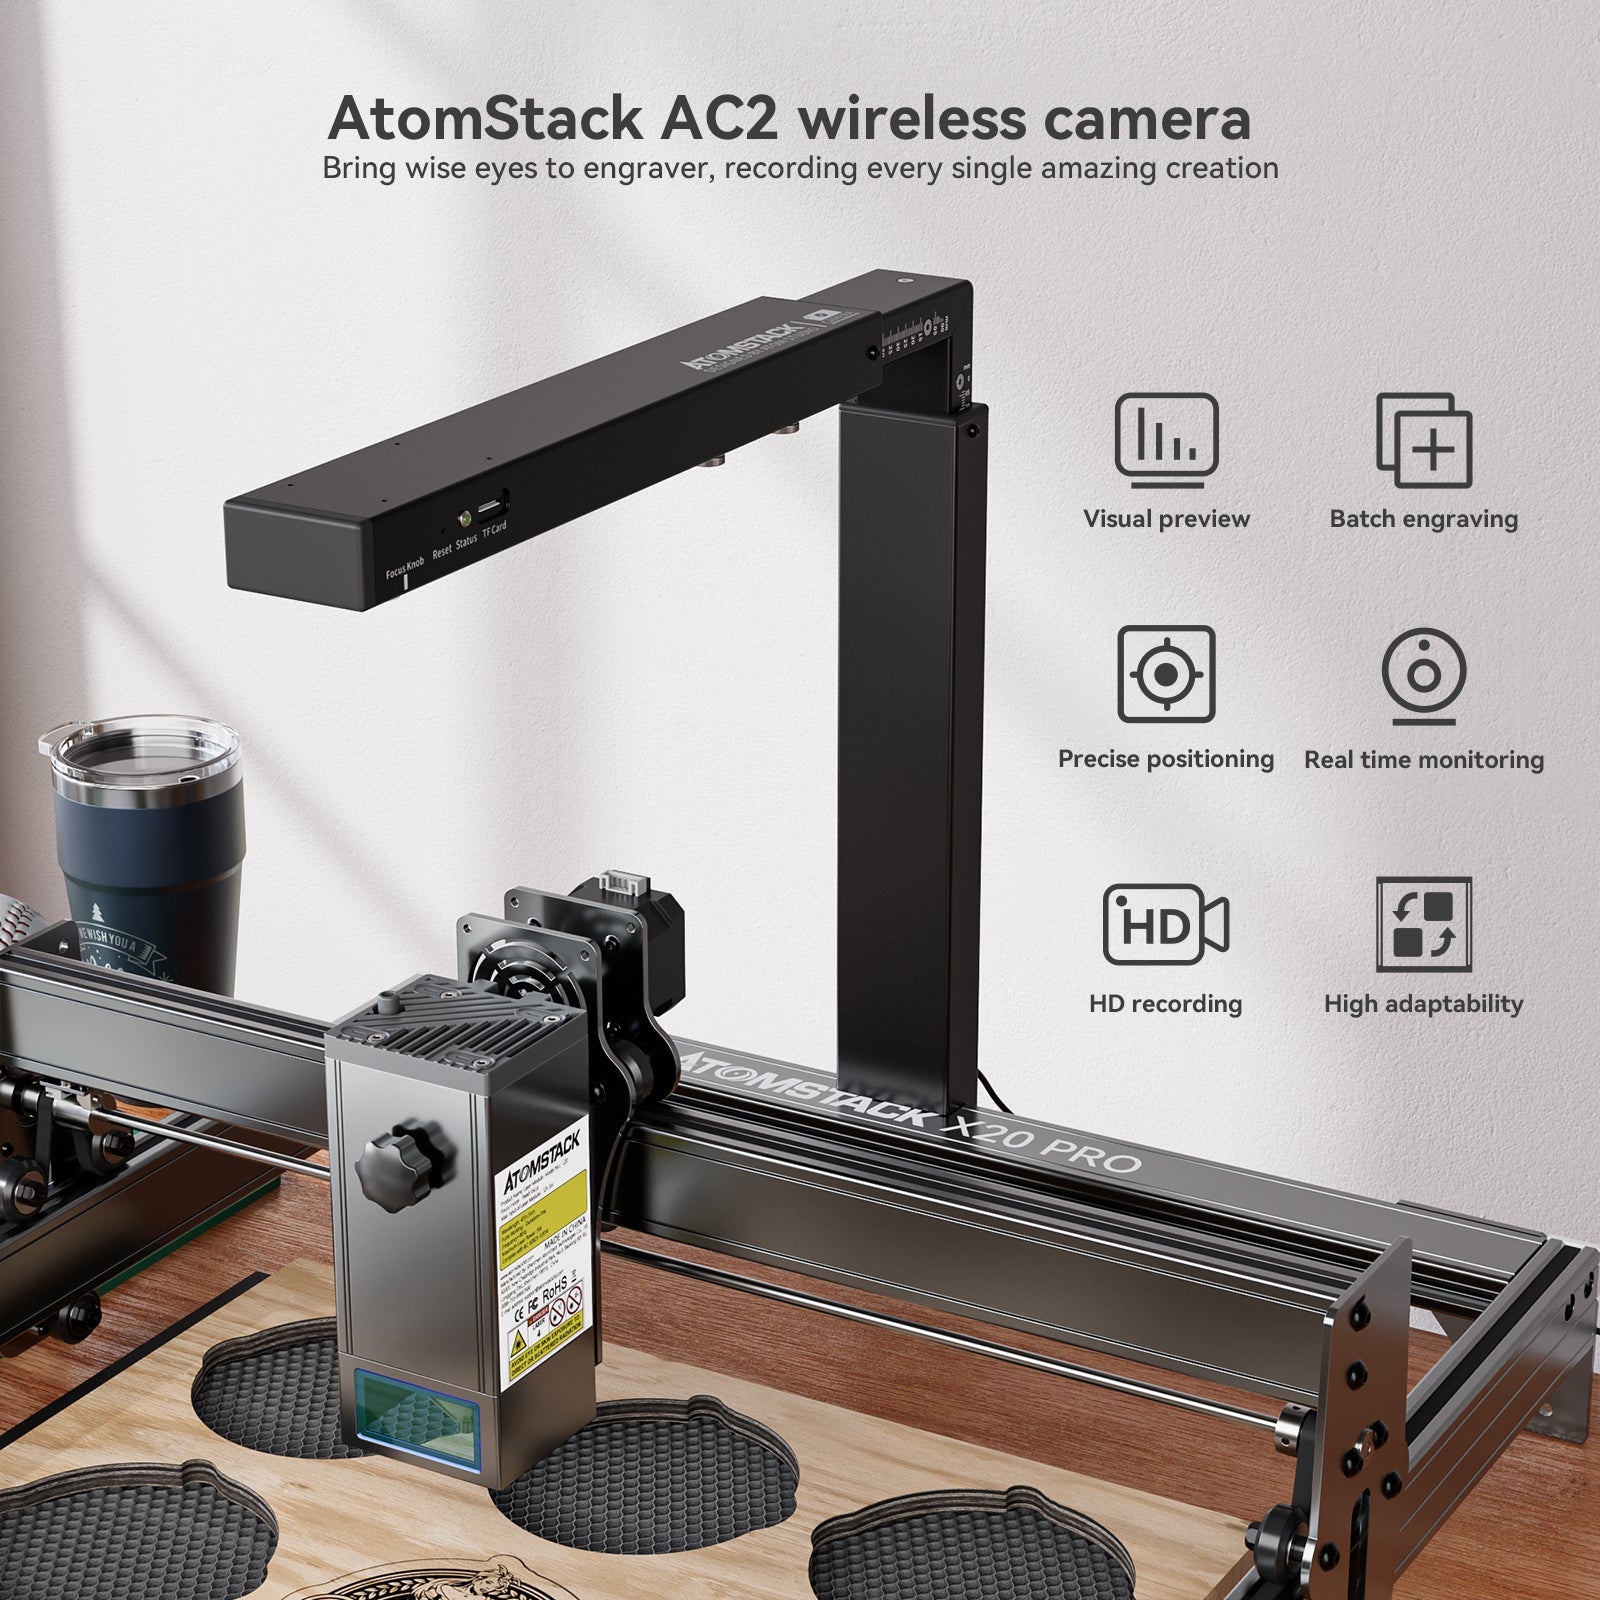 ATOMSTACK AC2 LightBurn Camera For Laser Engraving Machines 1080P HD Video Visual Preview WiFi Connection Real-Time Remote Monitoring Precise Positioning 32GB Memory Card